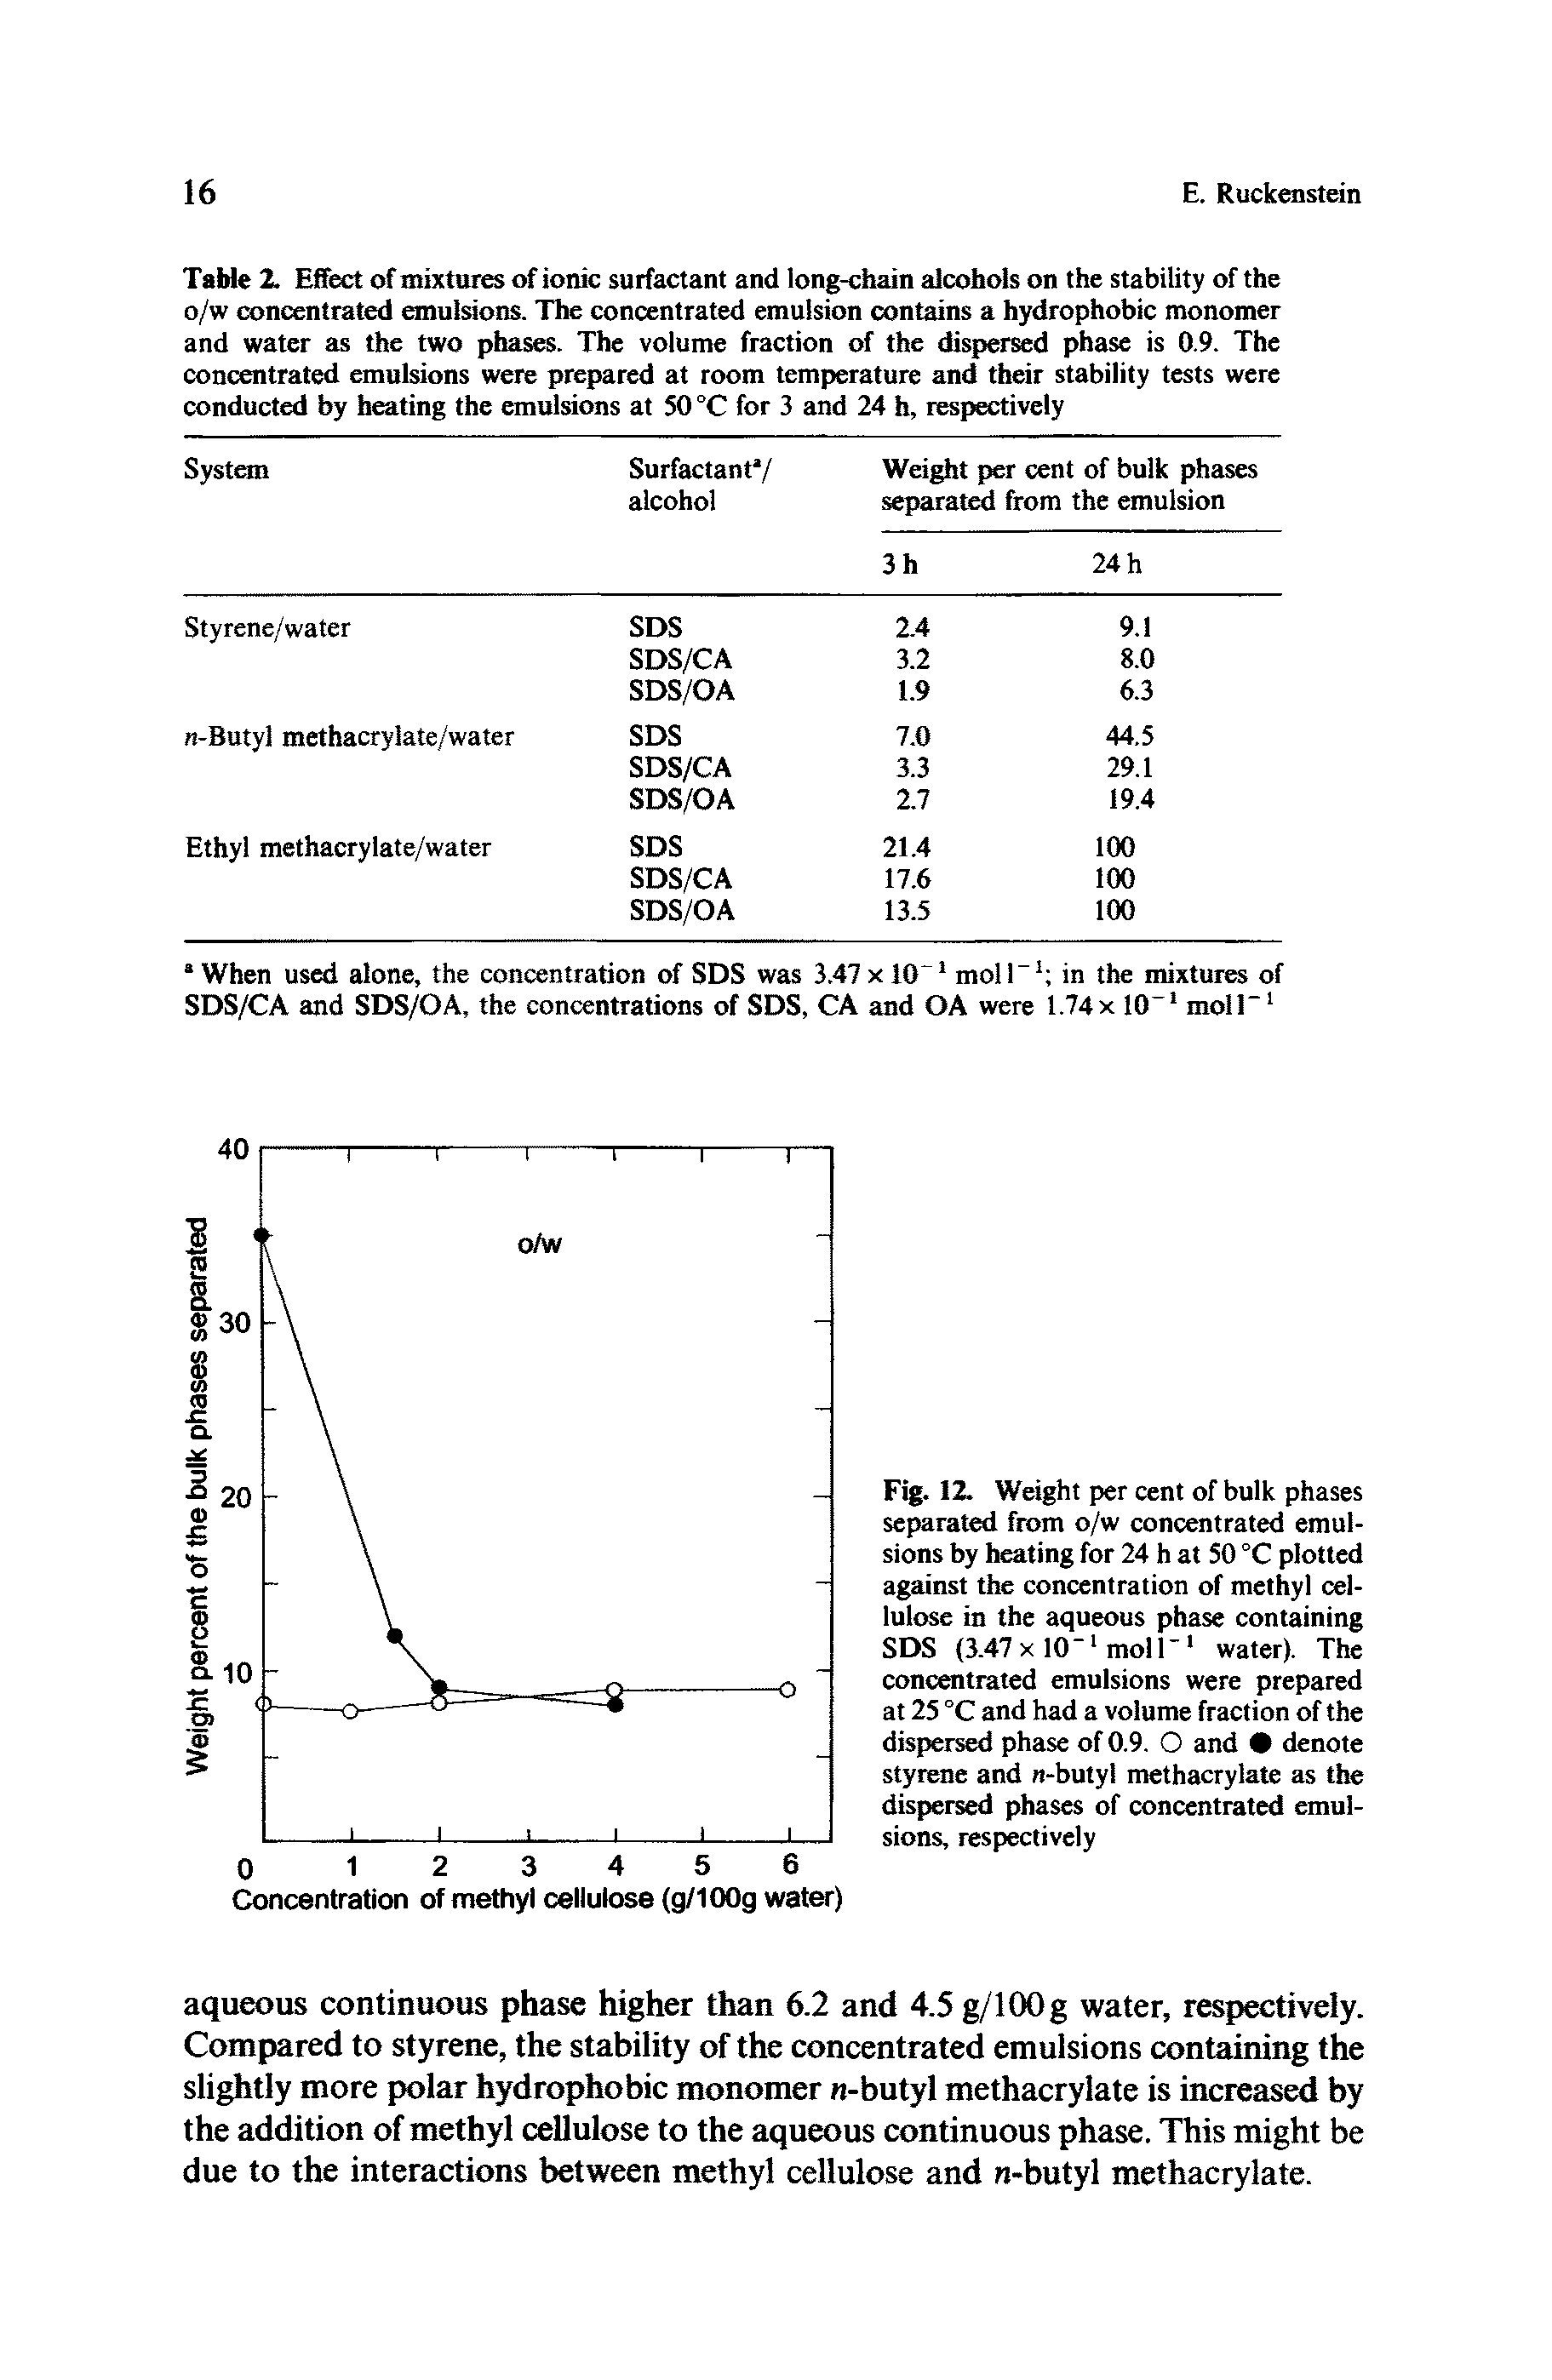 Fig. 12. Weight per cent of bulk phases separated from o/w concentrated emulsions by heating for 24 h at 50 °C plotted against the concentration of methyl cellulose in the aqueous phase containing SDS (3.47 x 10-1 mol T1 water). The concentrated emulsions were prepared at 25 °C and had a volume fraction of the dispersed phase of 0.9. O and denote styrene and n-butyl methacrylate as the dispersed phases of concentrated emulsions, respectively...